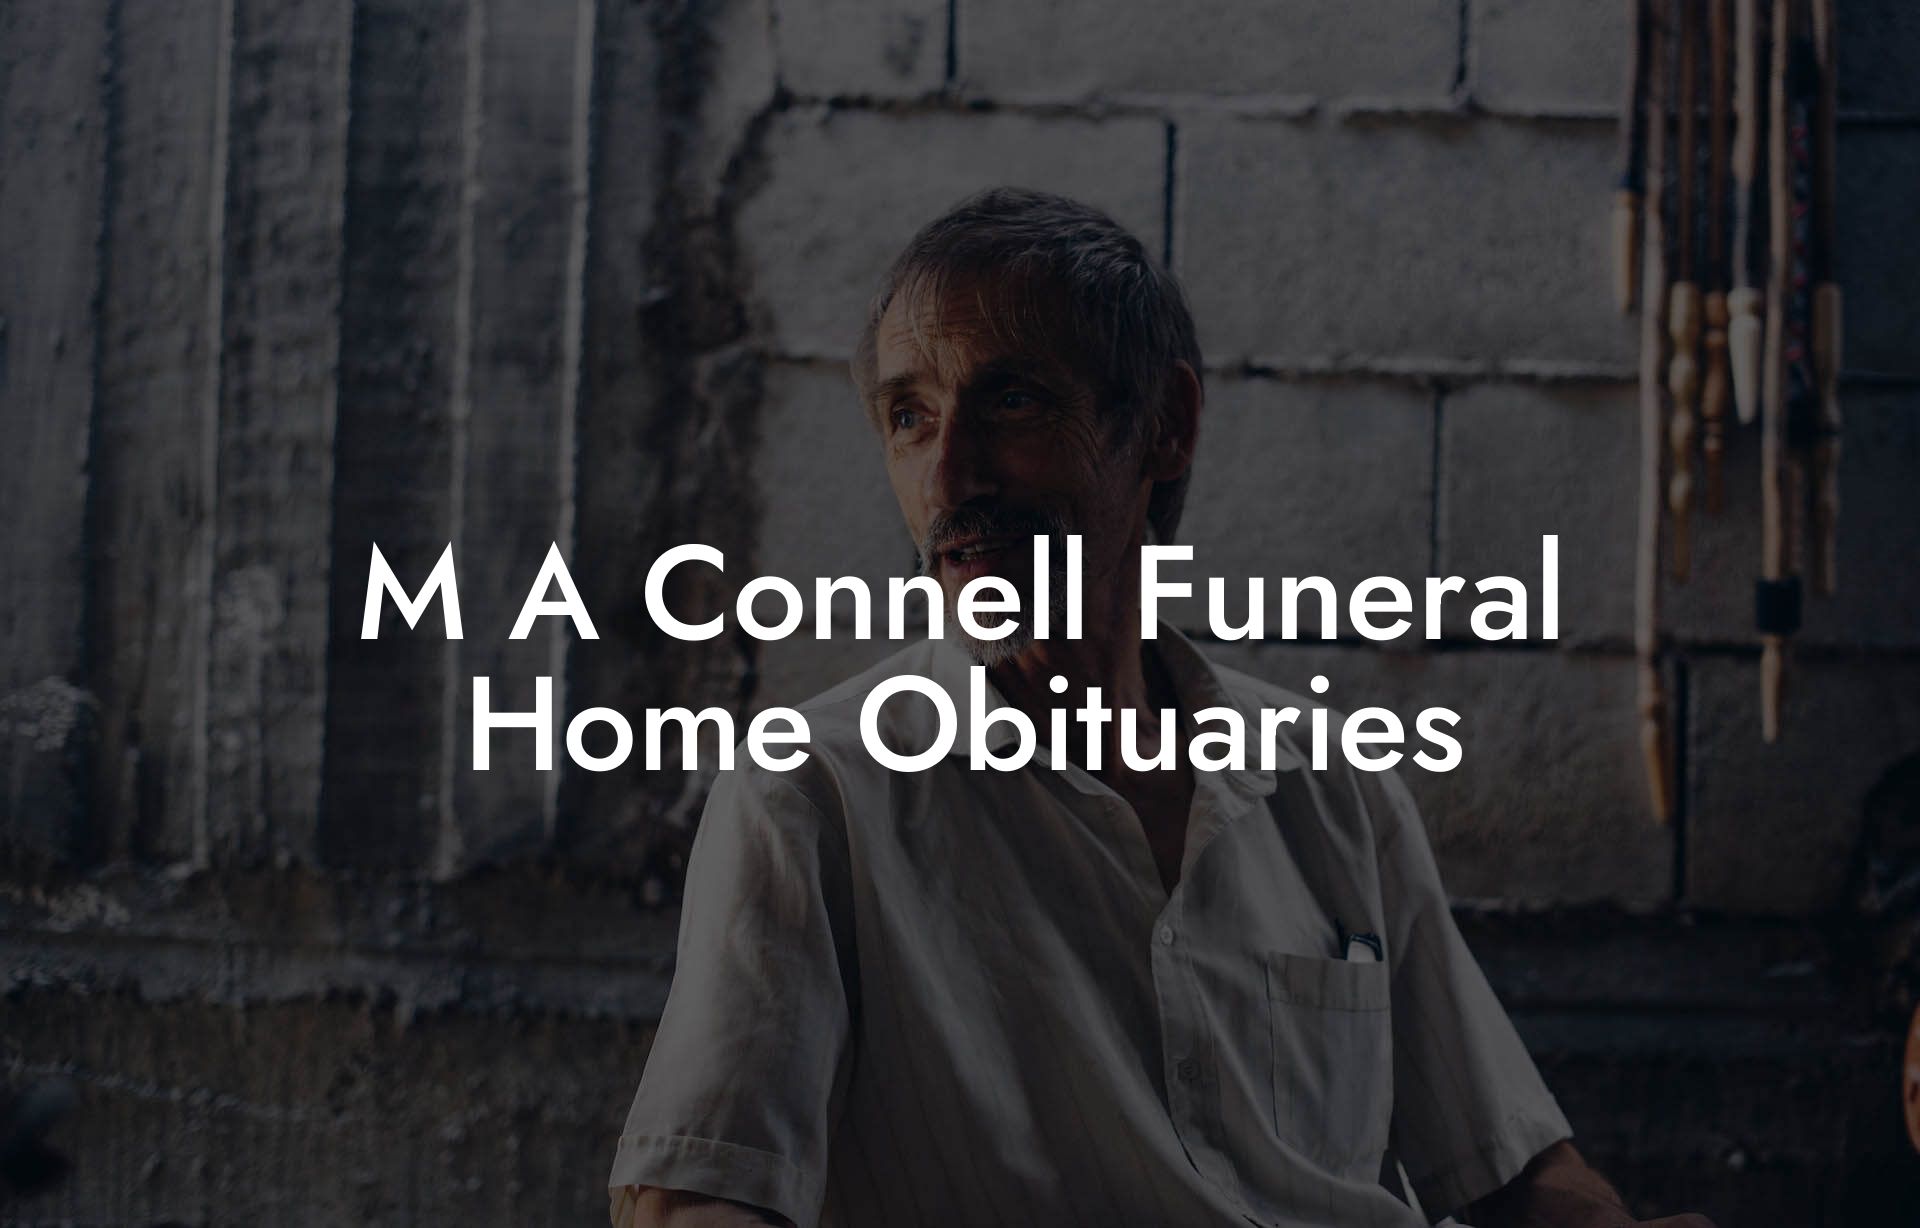 M A Connell Funeral Home Obituaries